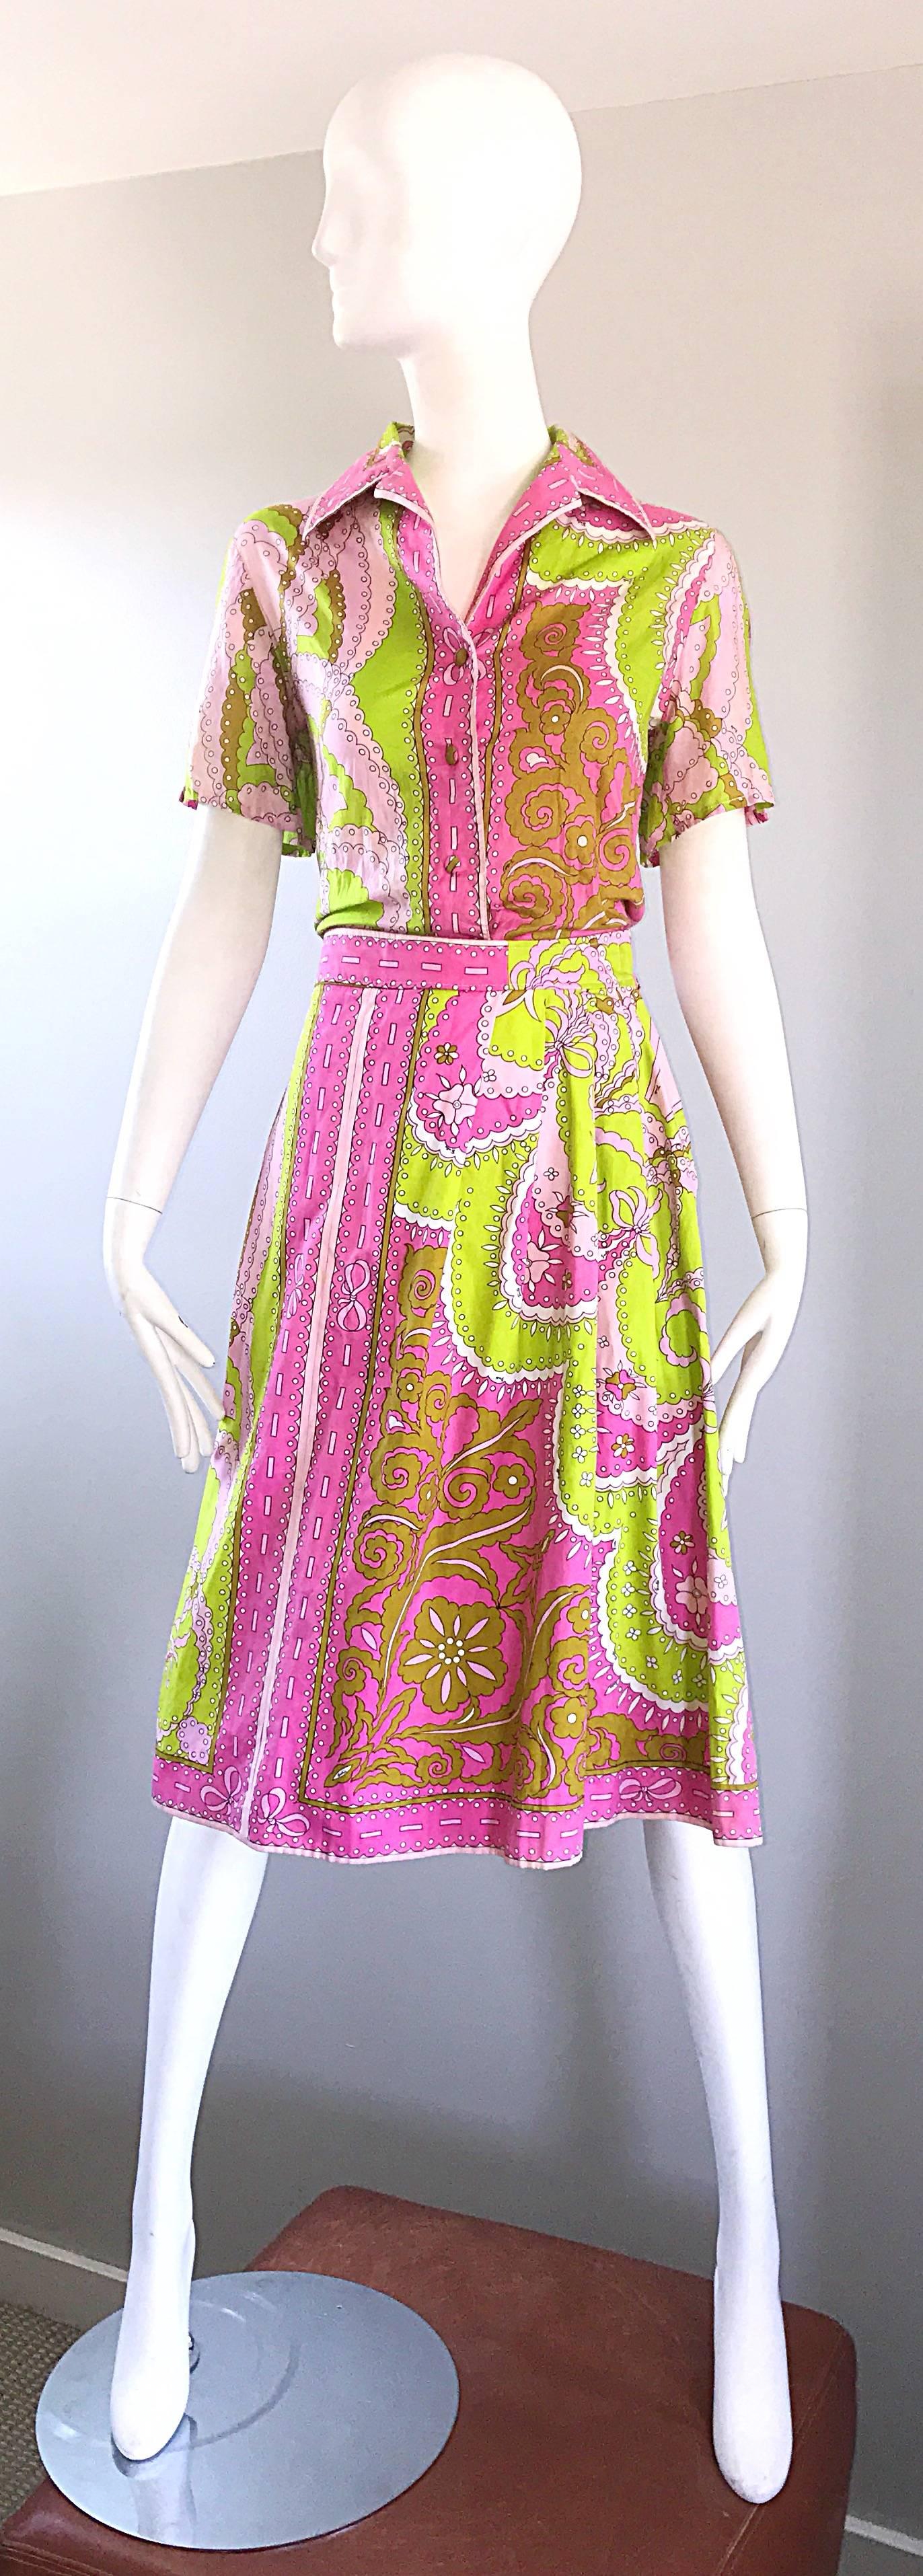 Rare 1960 EMILIO PUCCI lightweight cotton top and A Line skirt ensemble! Features vibrant neon pink, neon green and chartreuse green signature prints throughout. Pucci signature scribbled sporadically thorughout. Blouse buttons up the front in